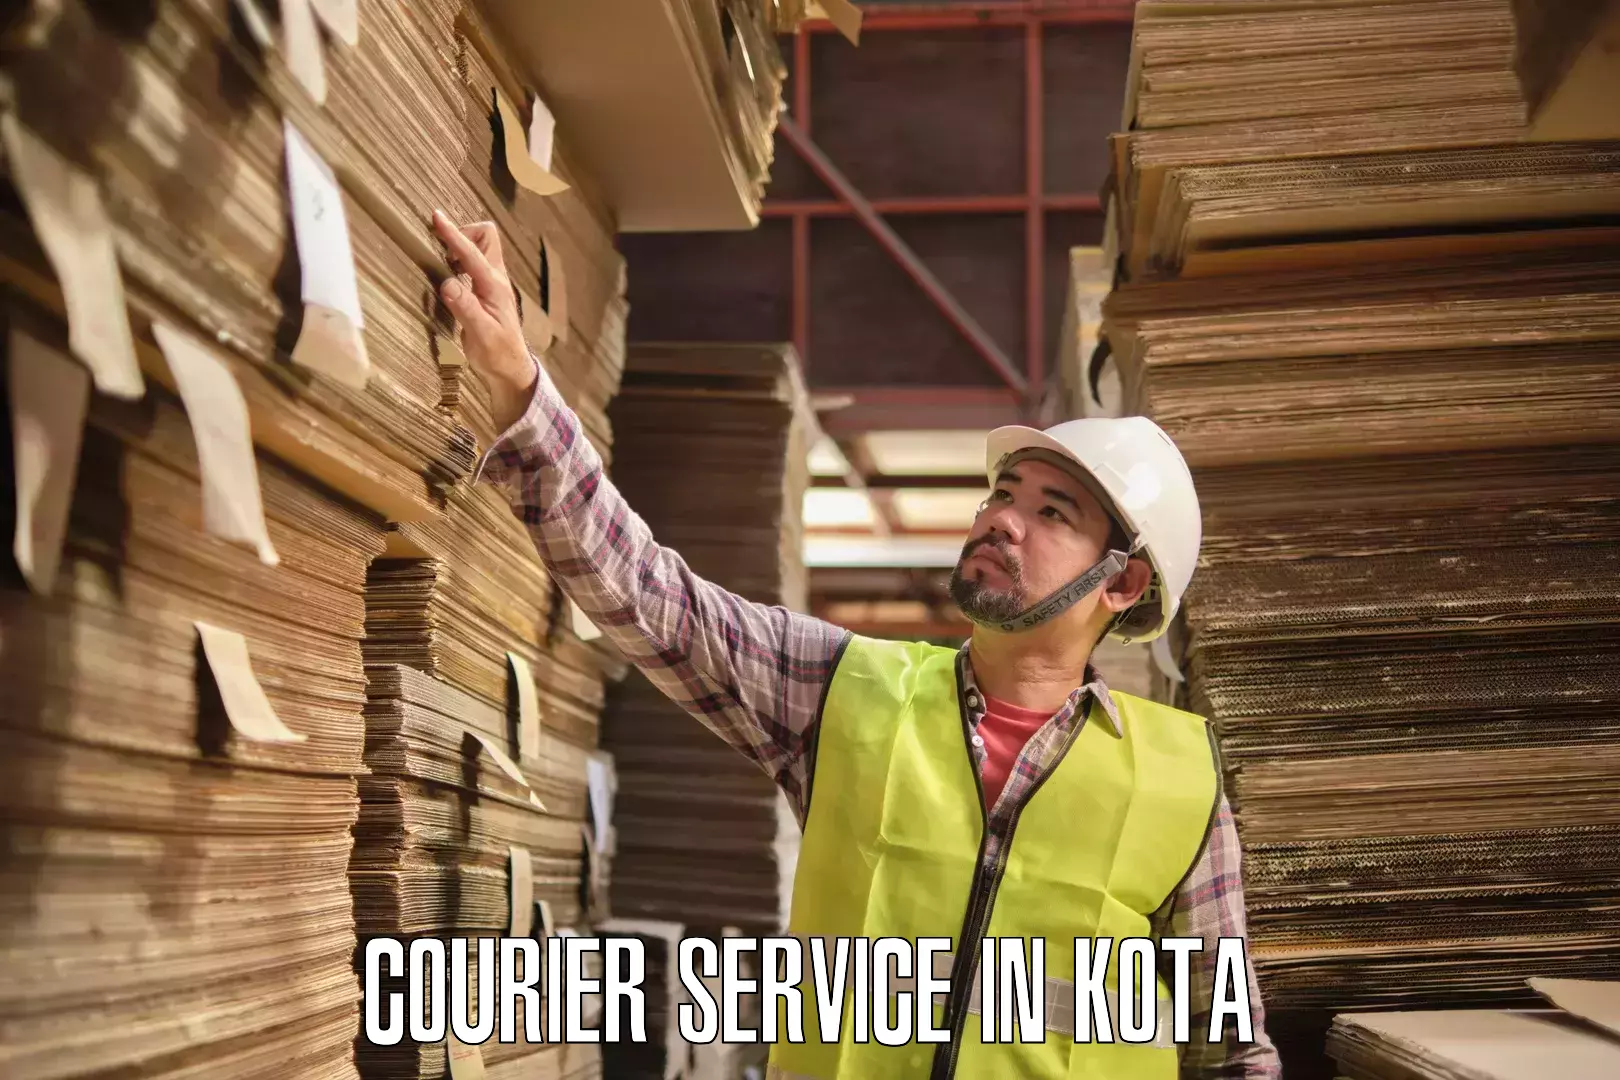 Local courier options in Kota